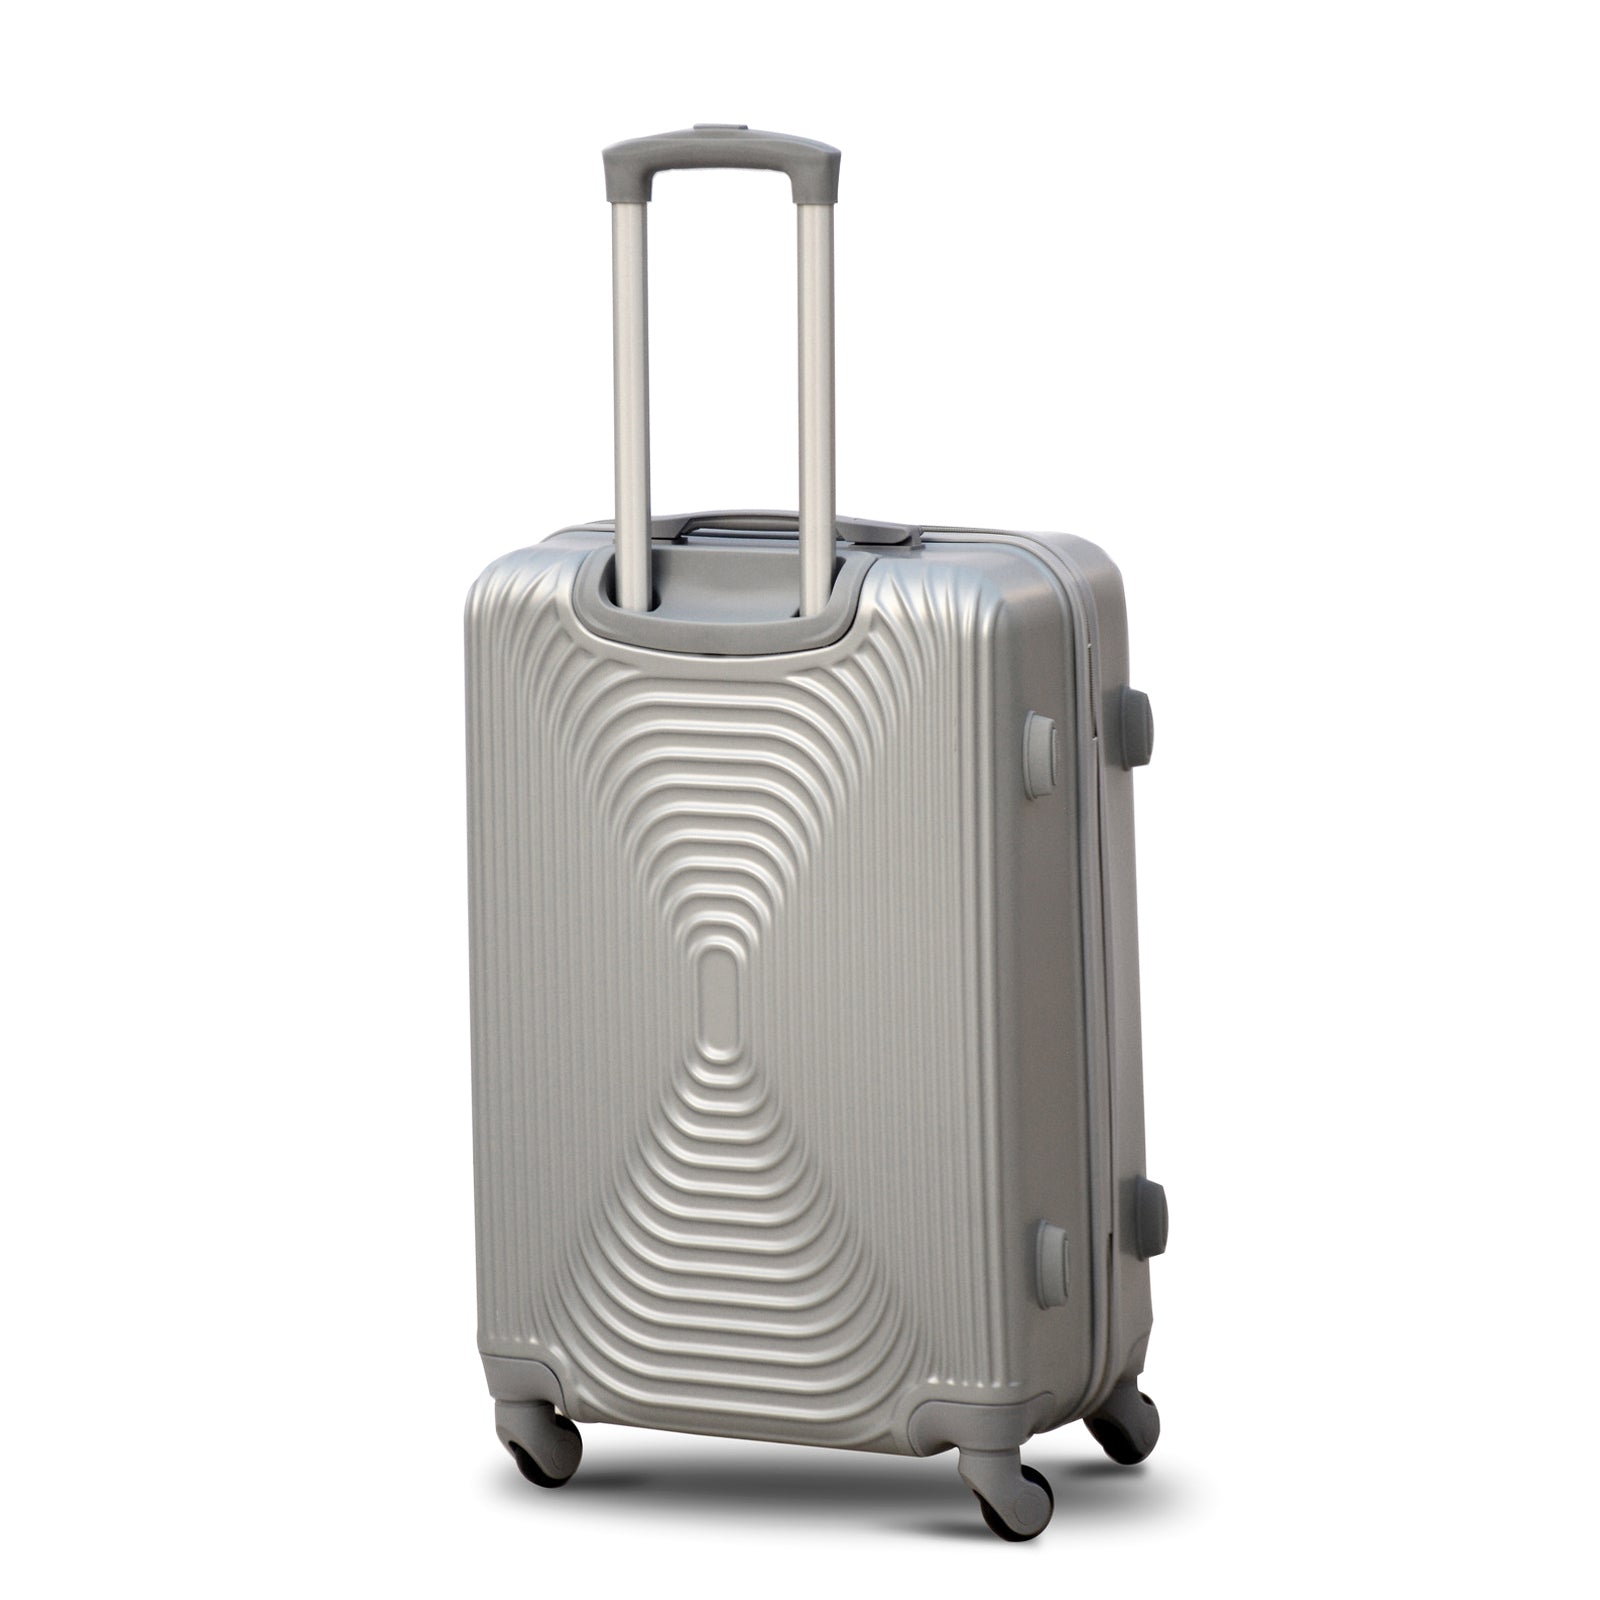 32 Inches Silver Fashion ABS Luggage Lightweight Hard Case Master Trolley with Spinner Wheel